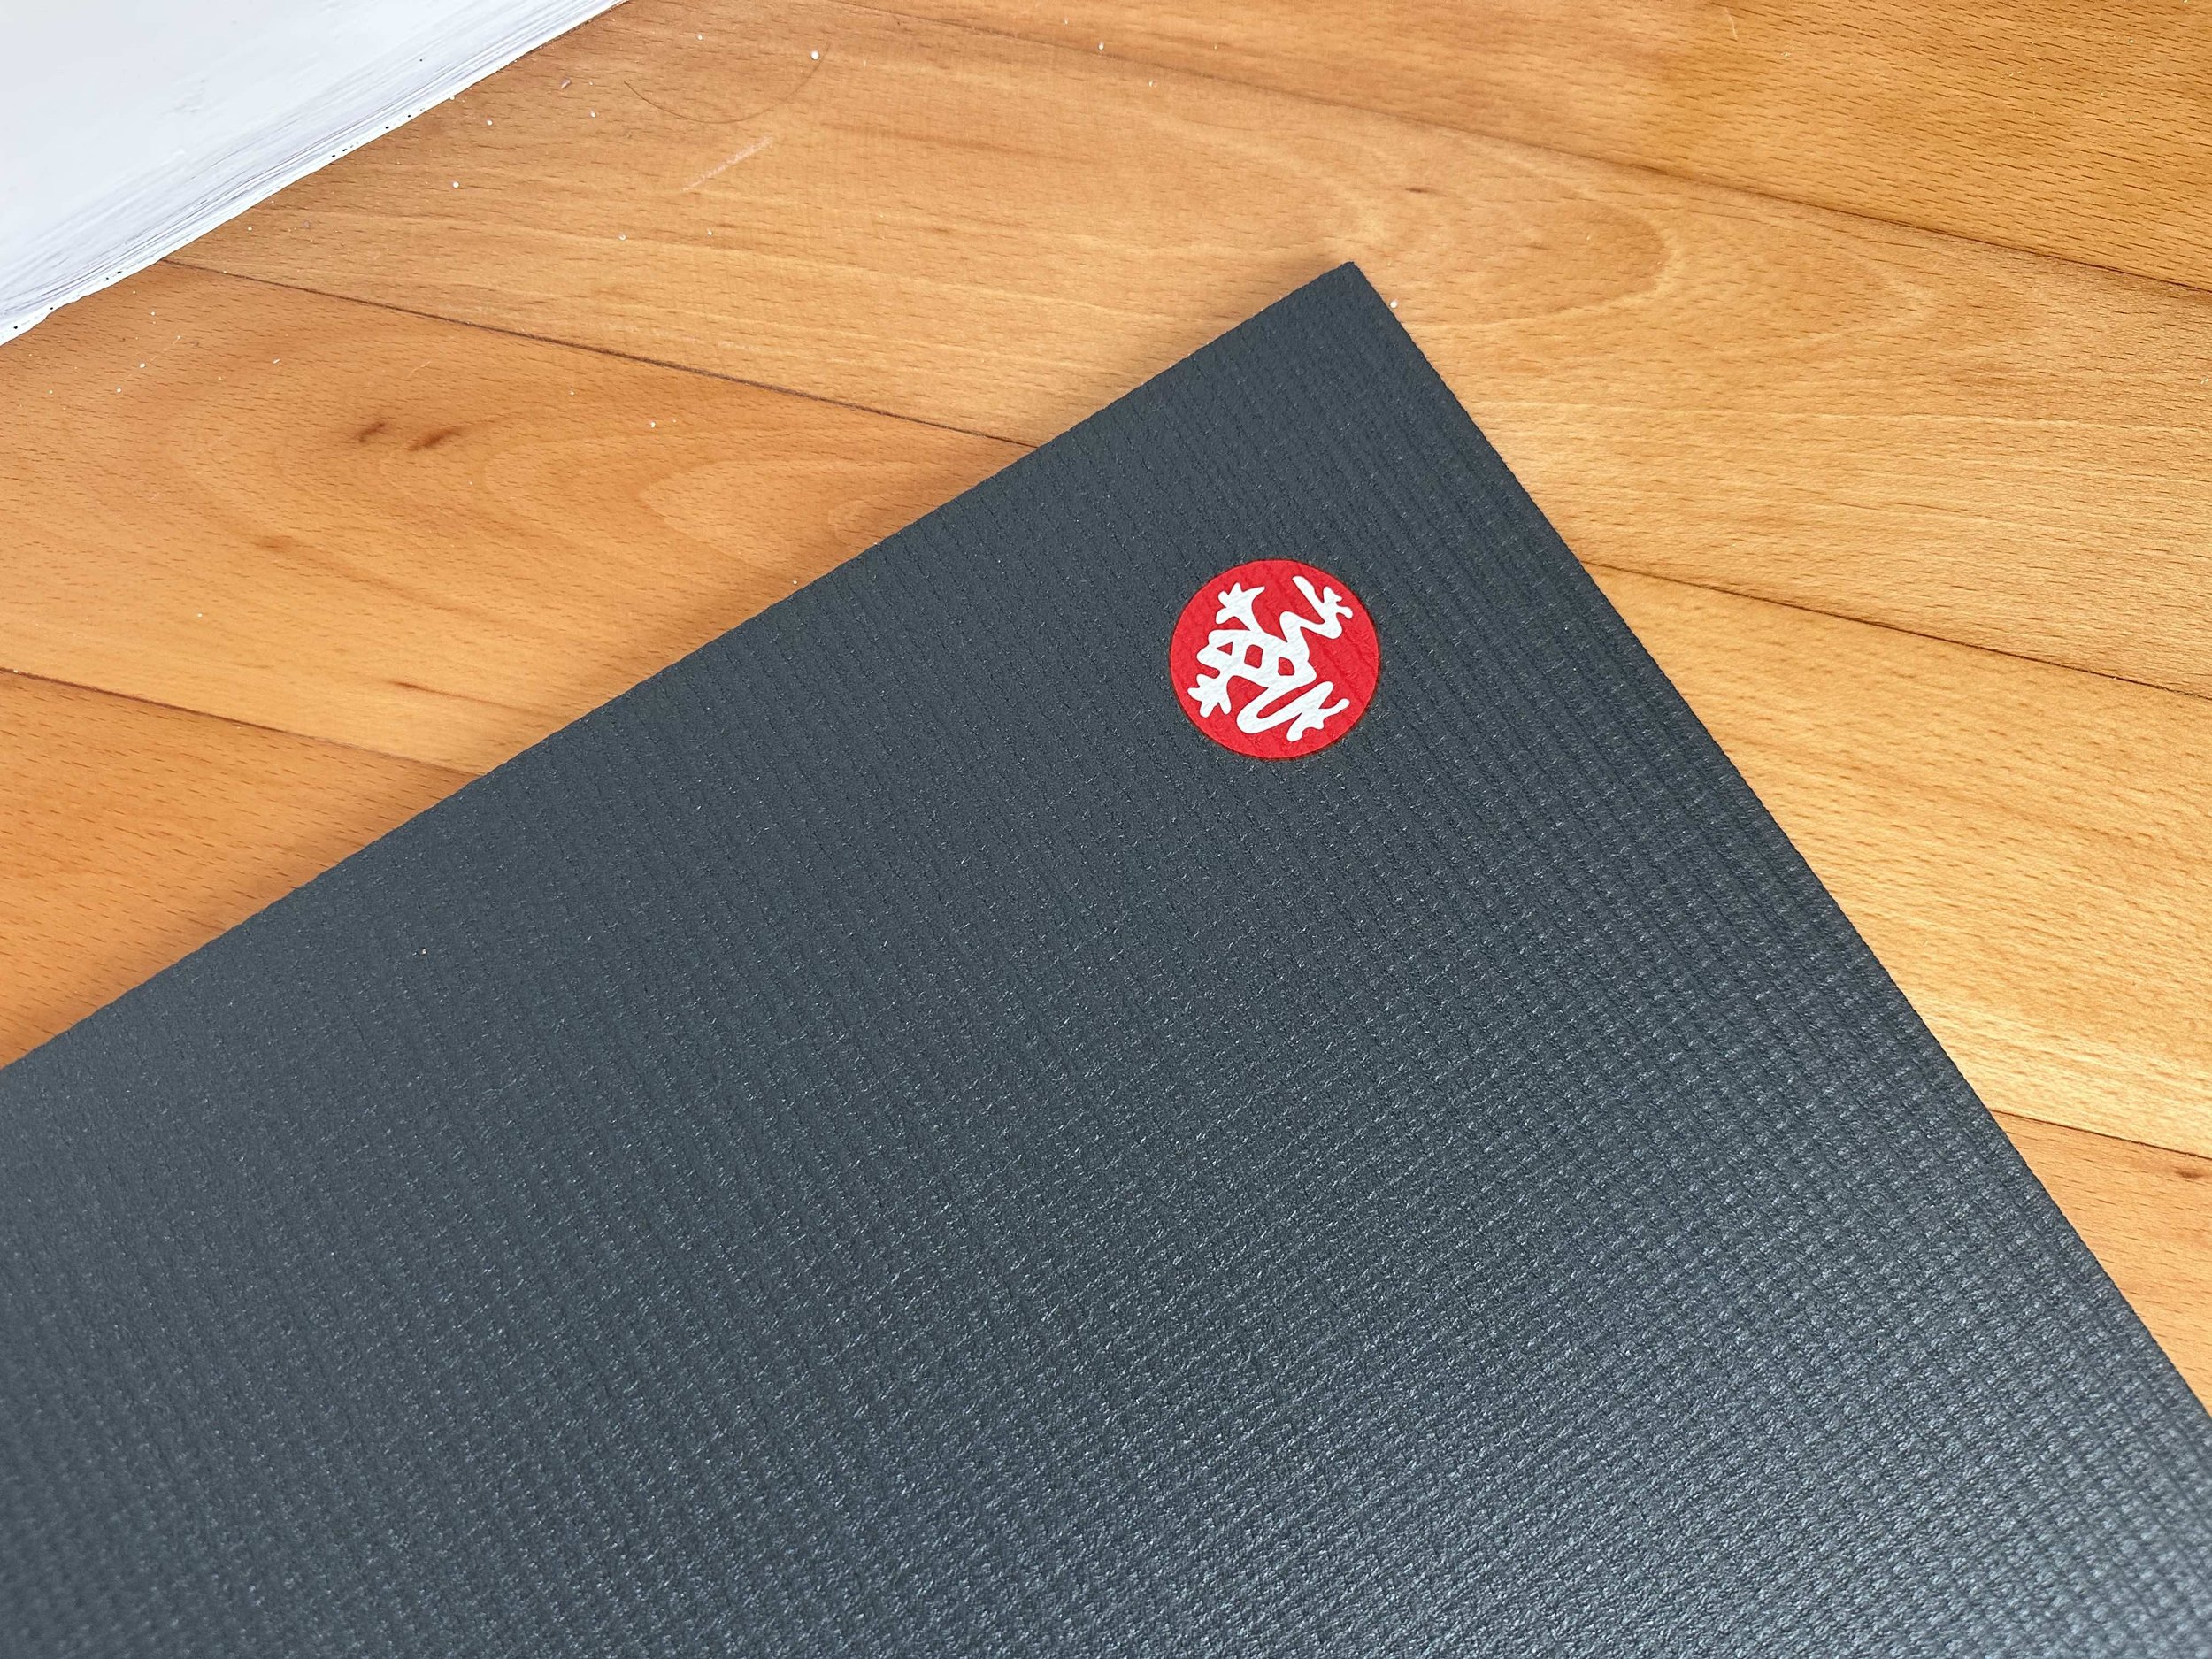 Manduka PRO Yoga Mat 6mm Review: Is It Worth the Investment? (2023